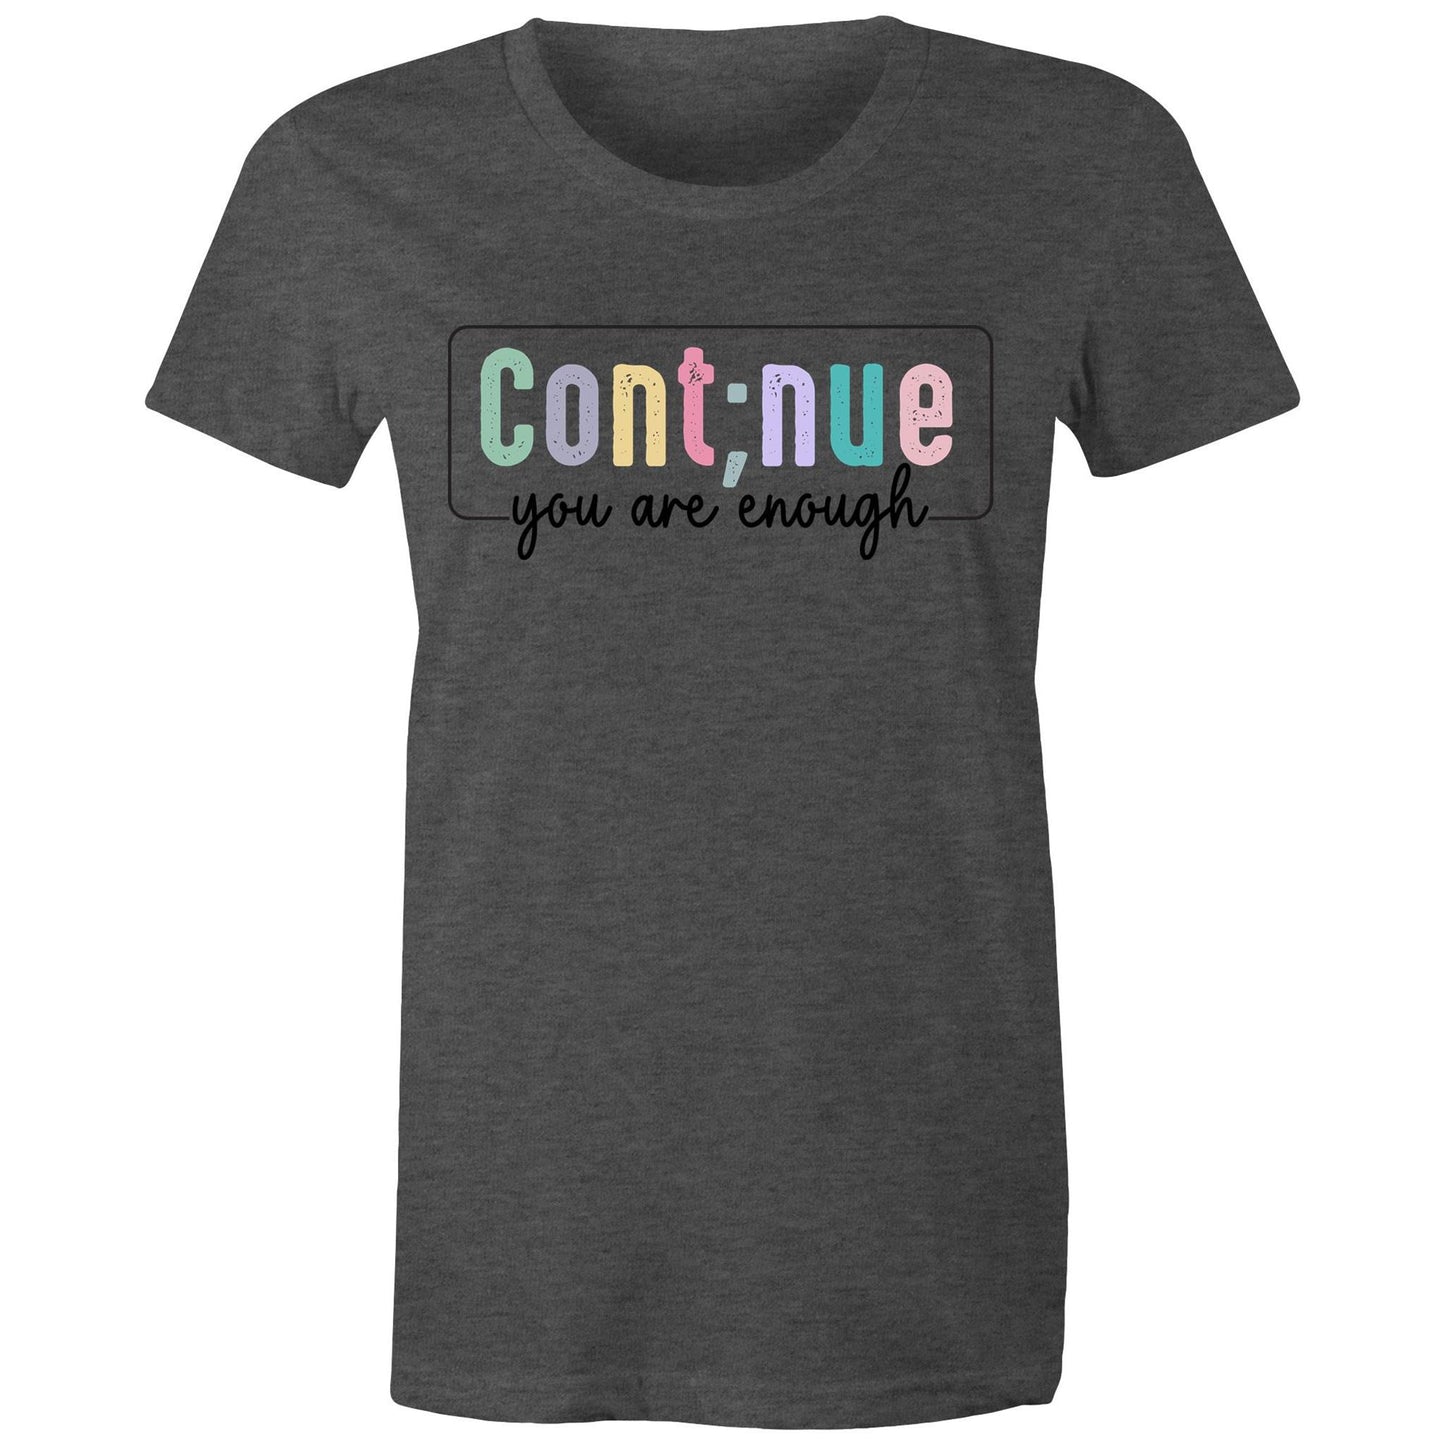 Womens Tee - Continue you are enough